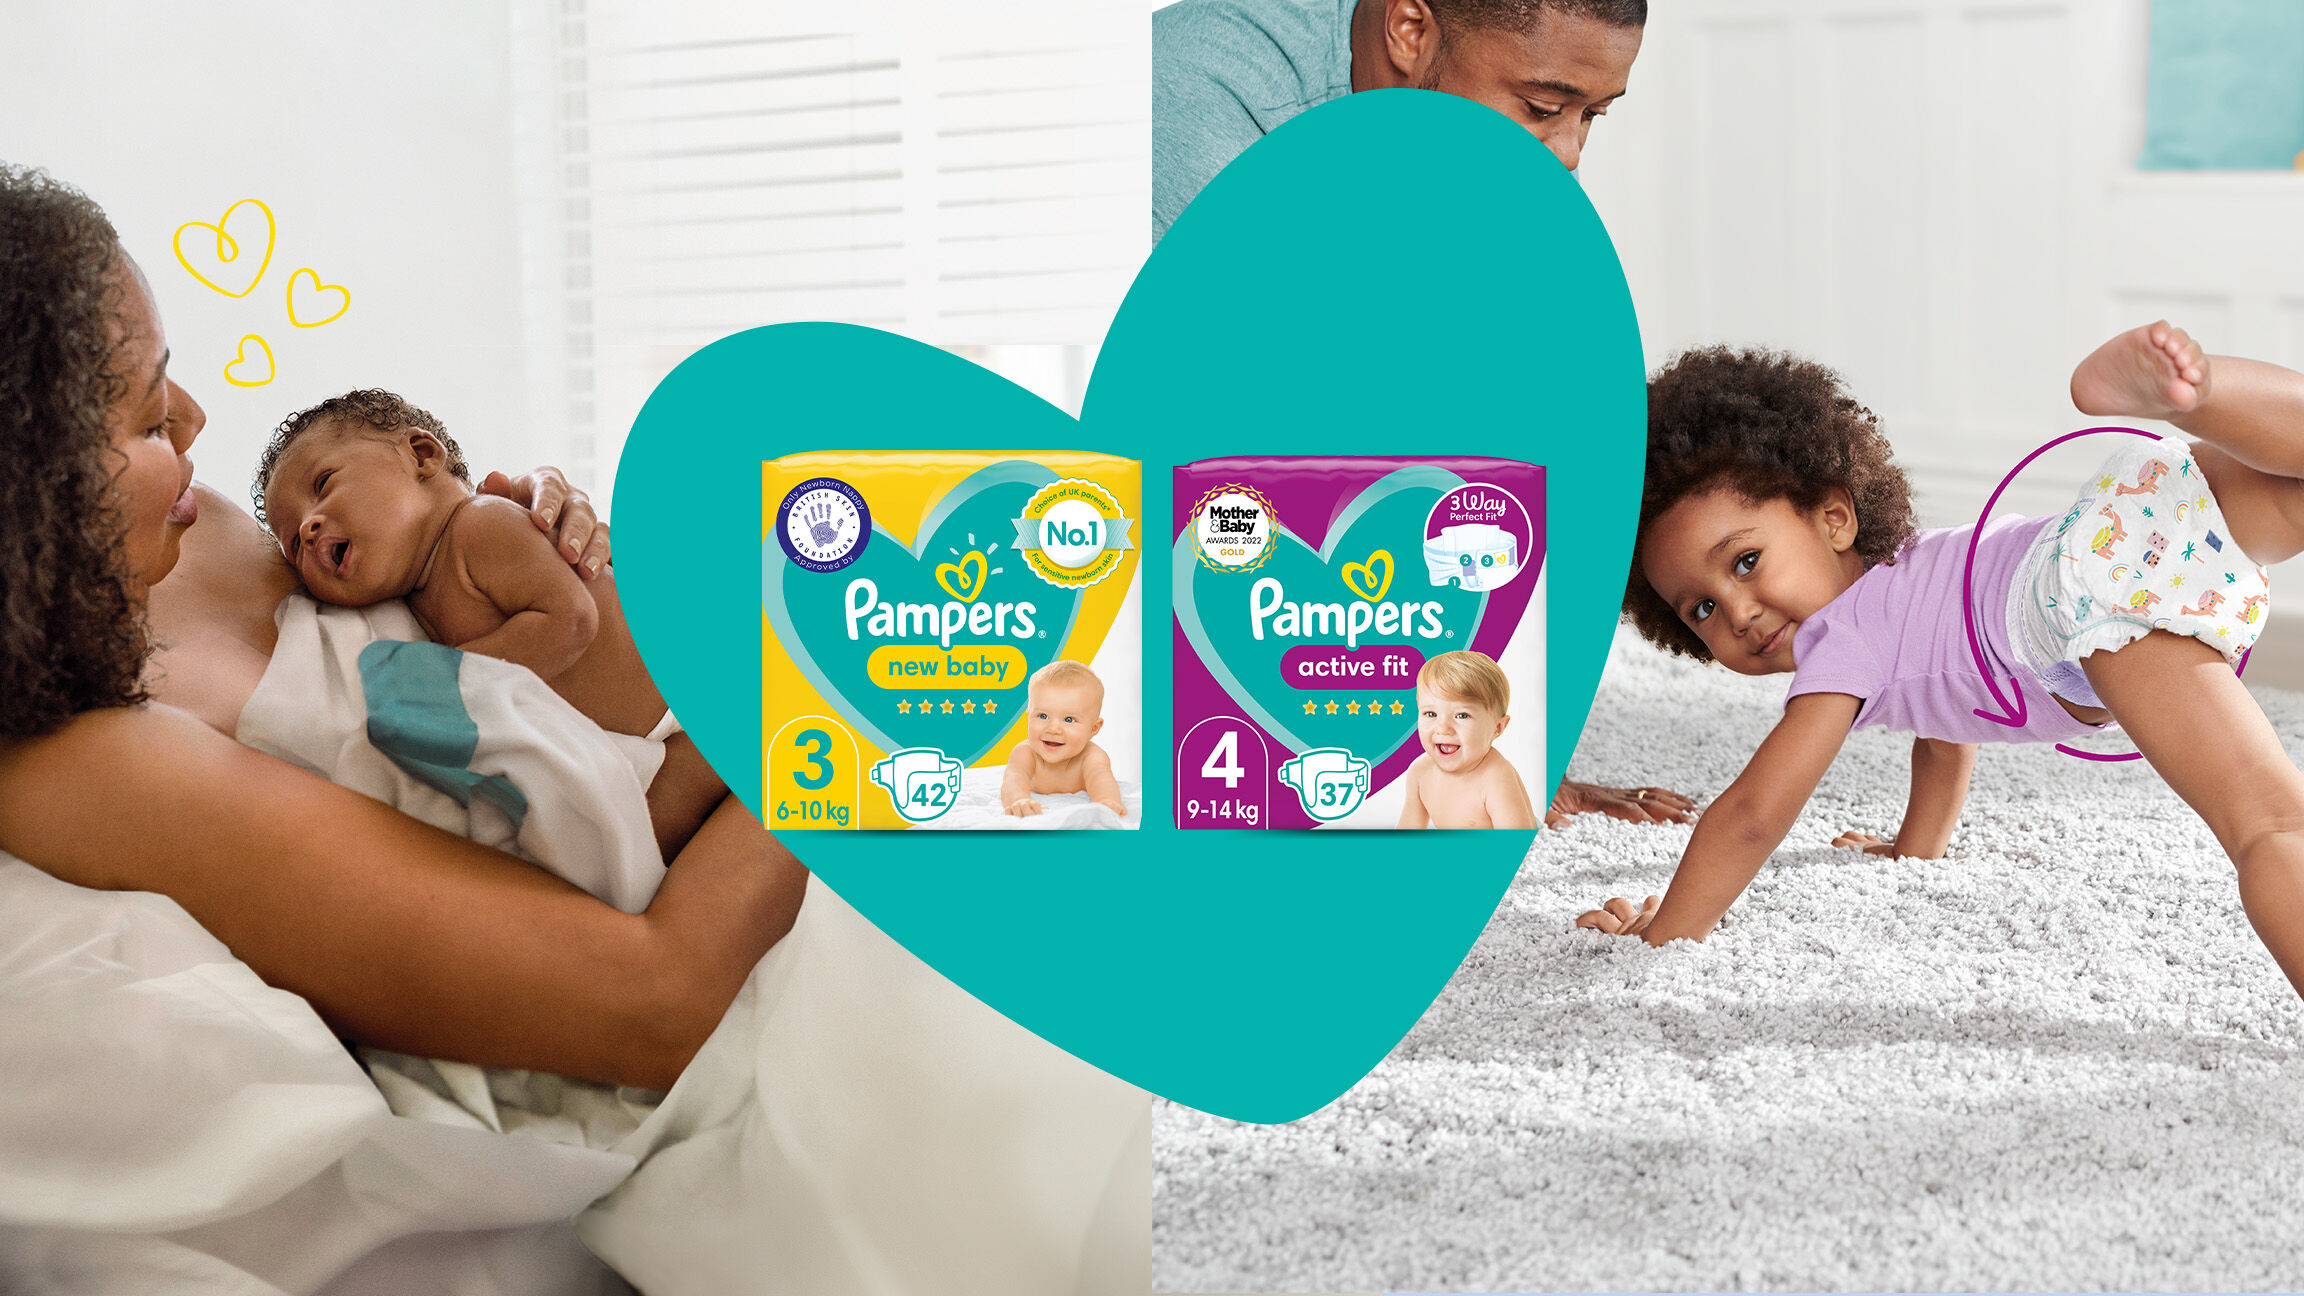 Share the Pampers magic!